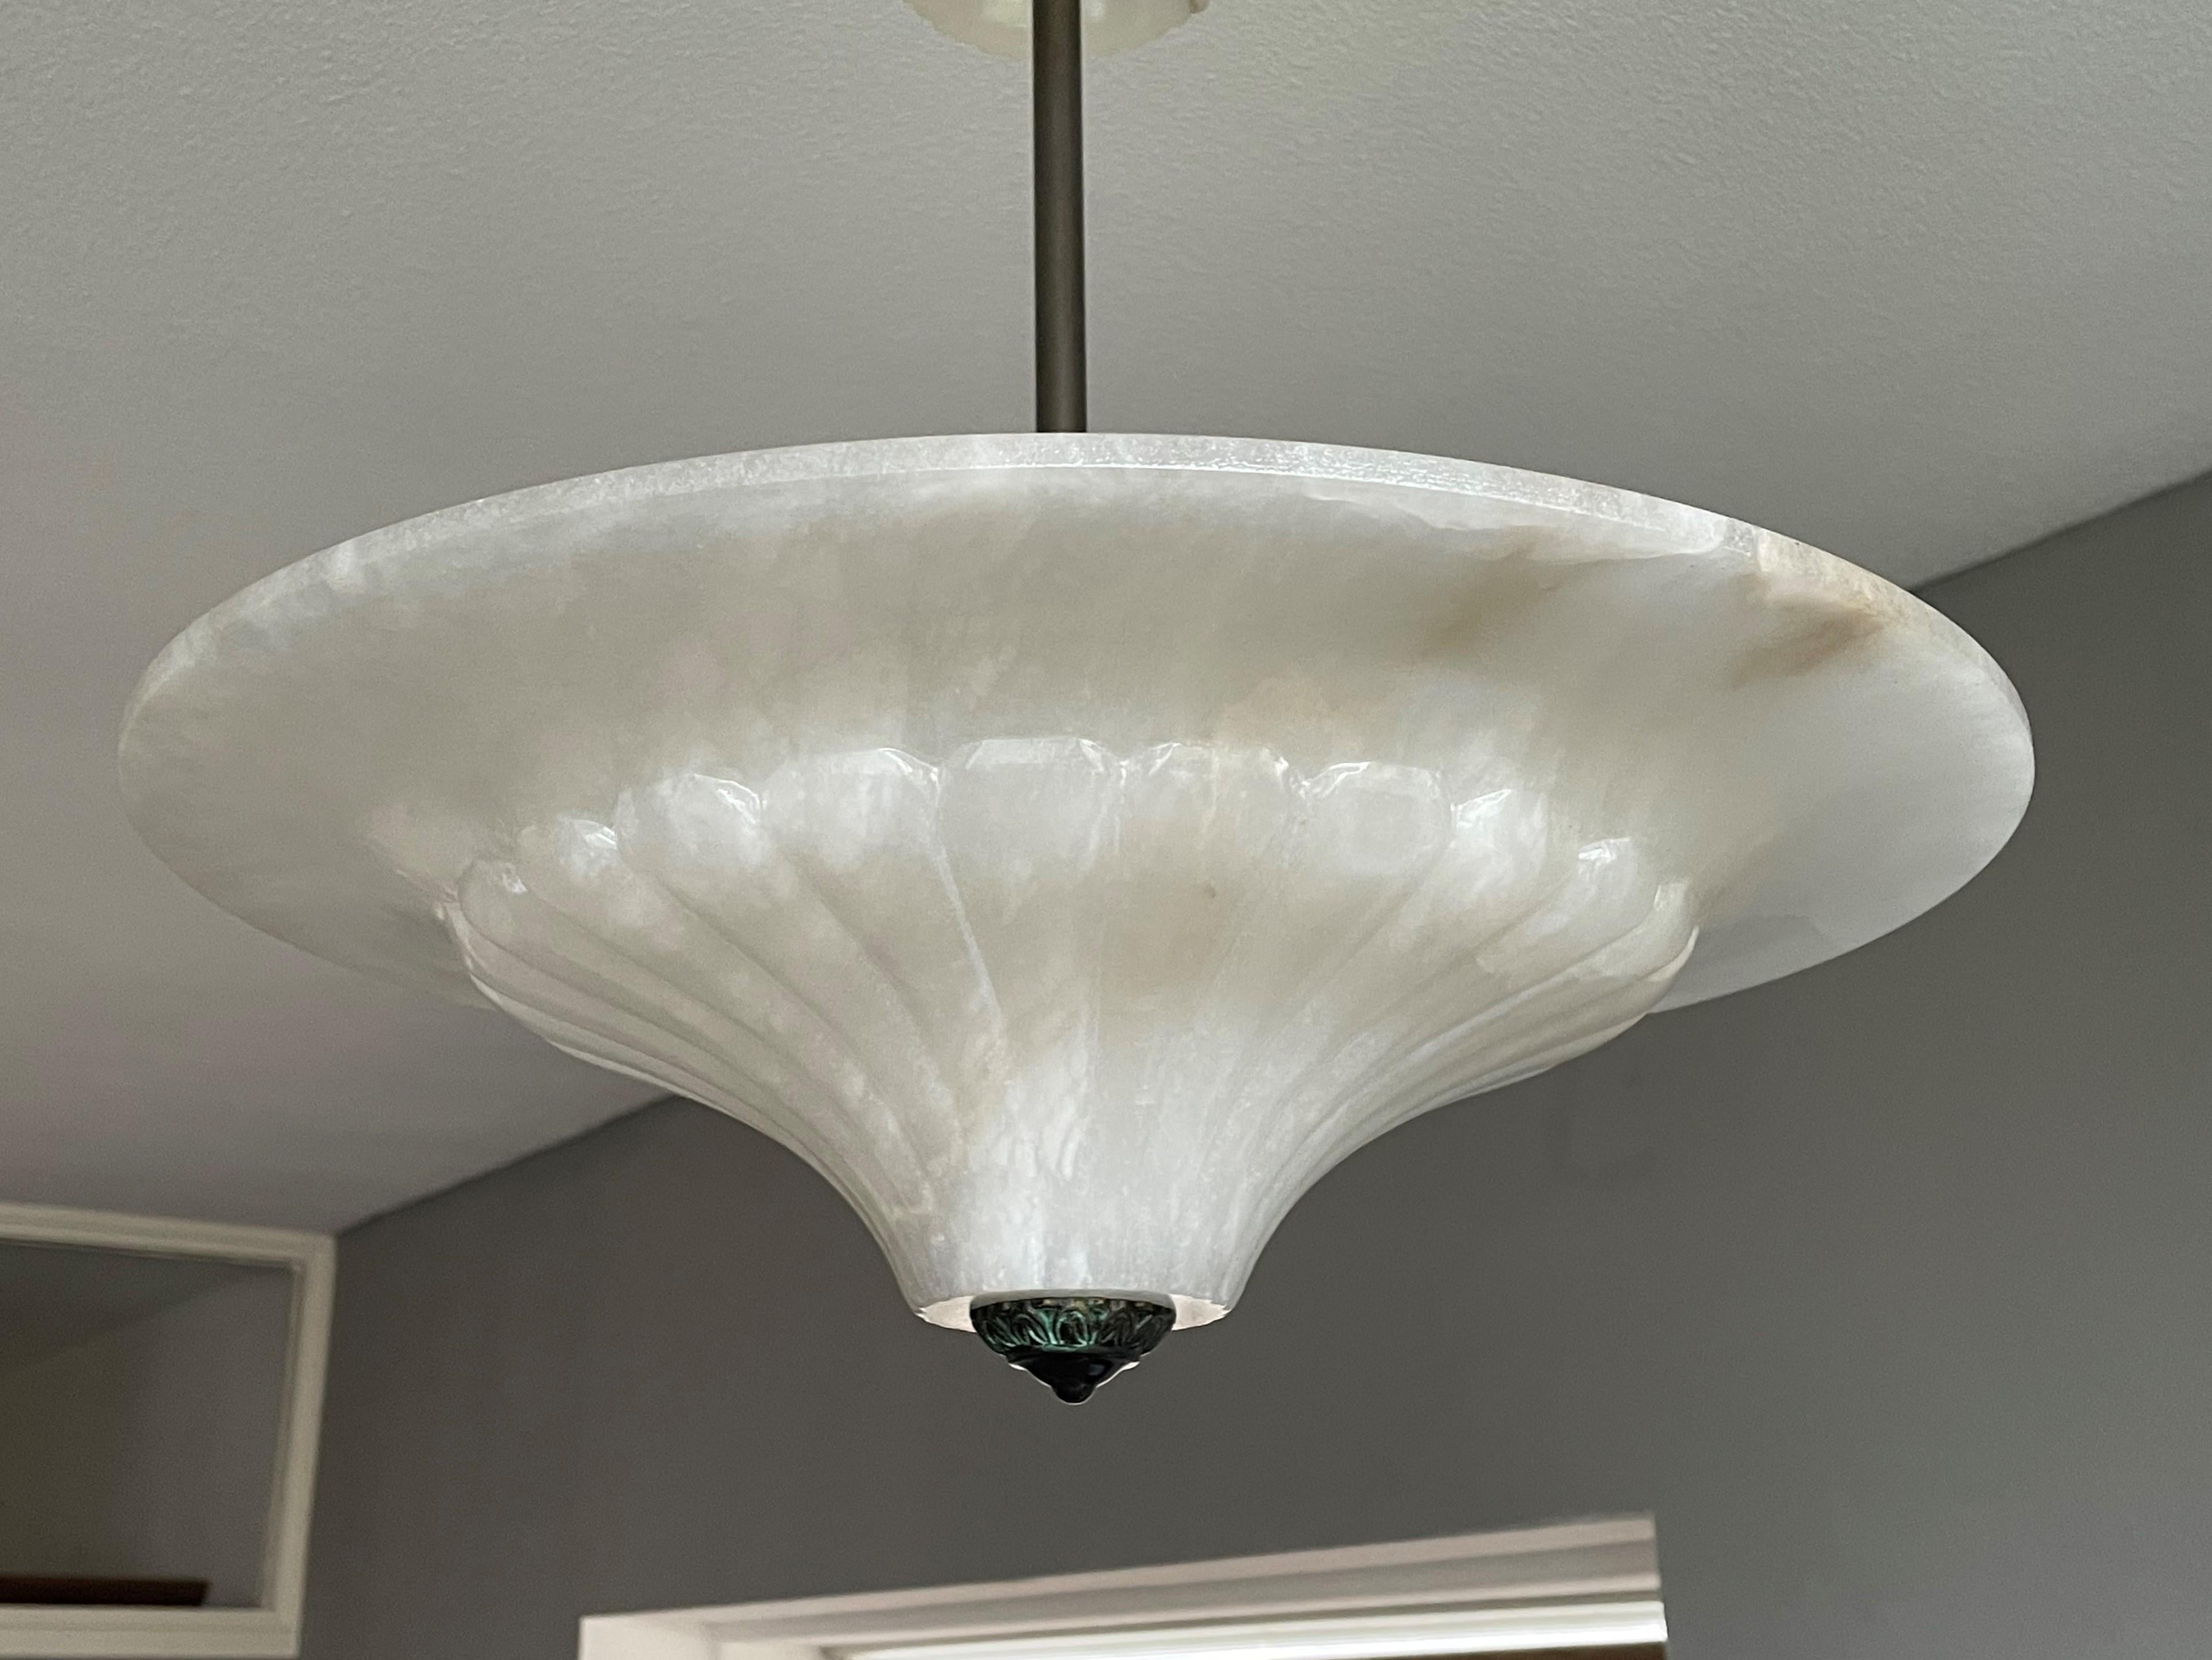 Excellent condition, good size and rare design, 3-light chandelier.

If you like alabaster light fixtures, but you prefer them in this Classical Roman style, then this 1970s lengthy specimen could be perfect for you. The combination of the white